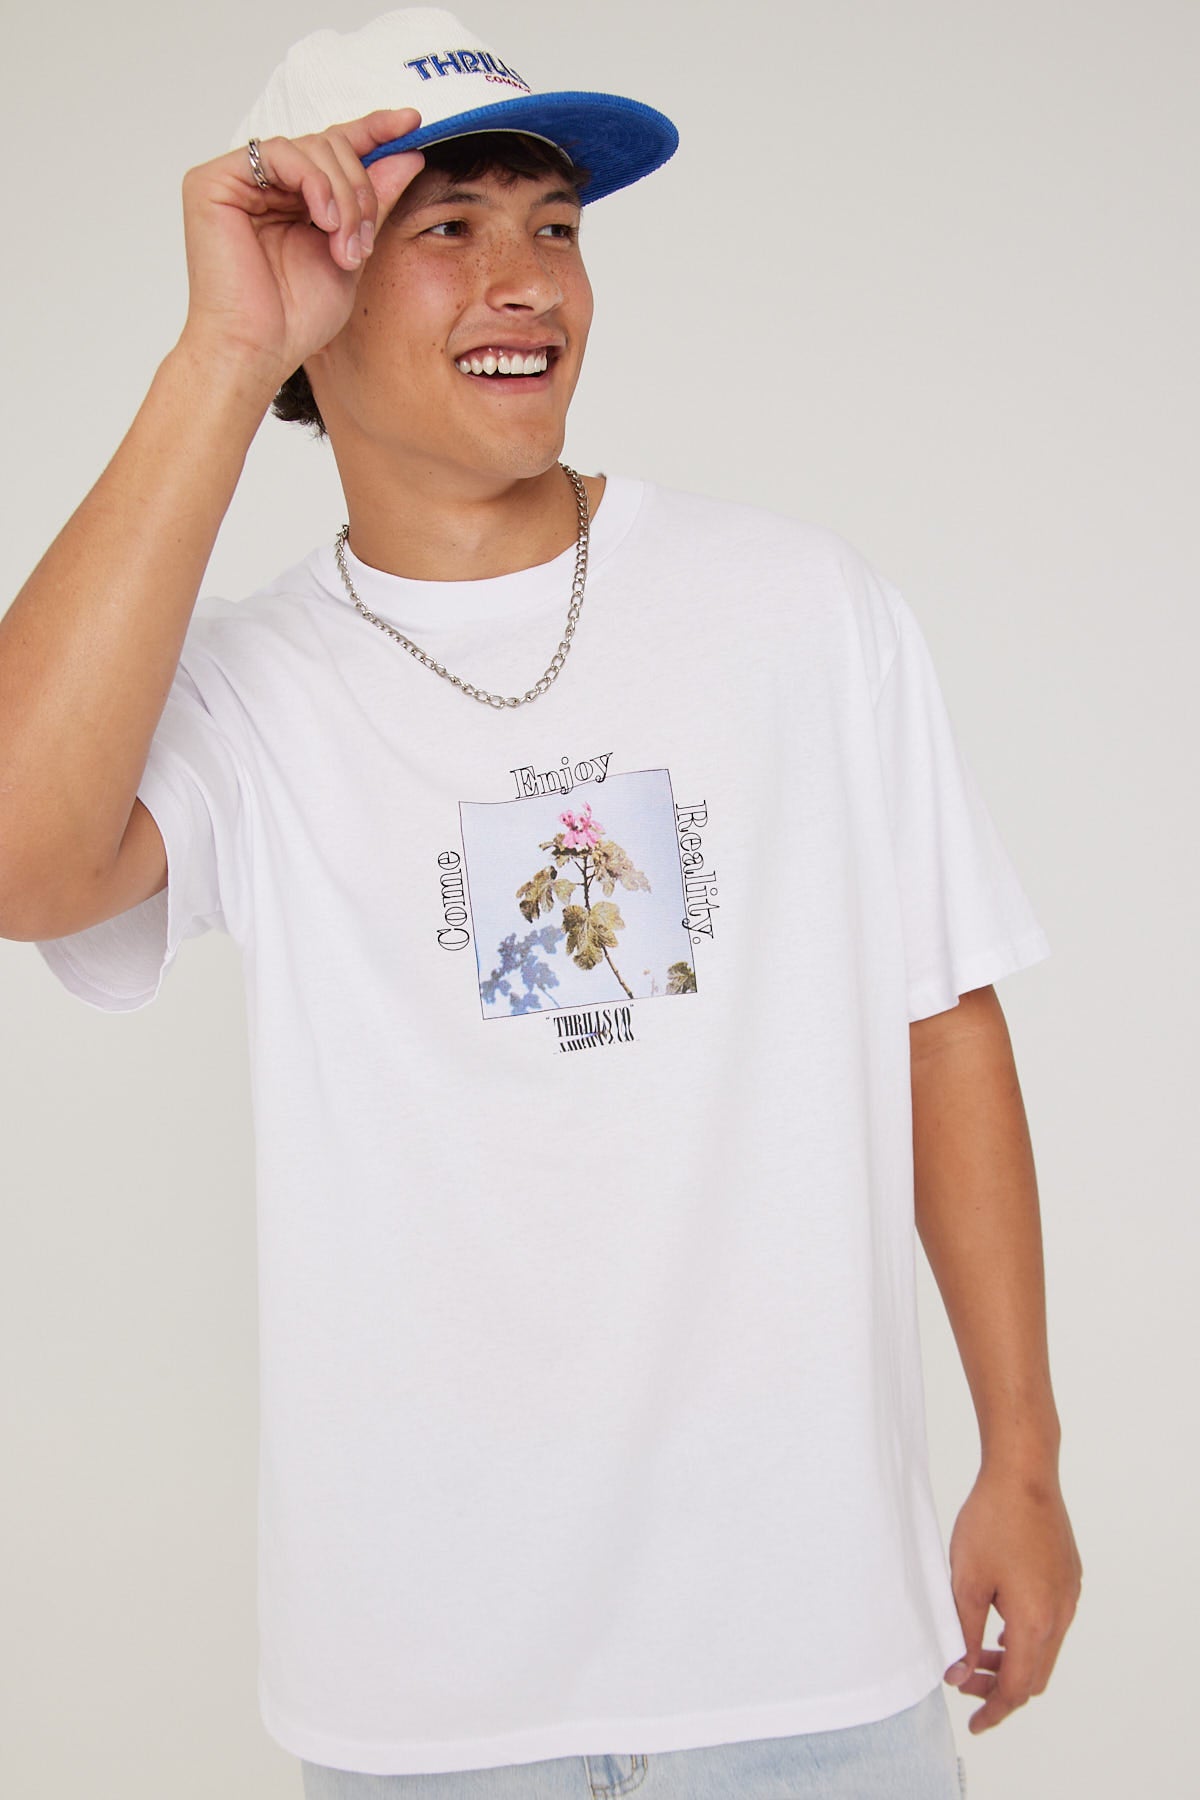 Thrills Come Enjoy Reality Merch Fit Tee Lucent White